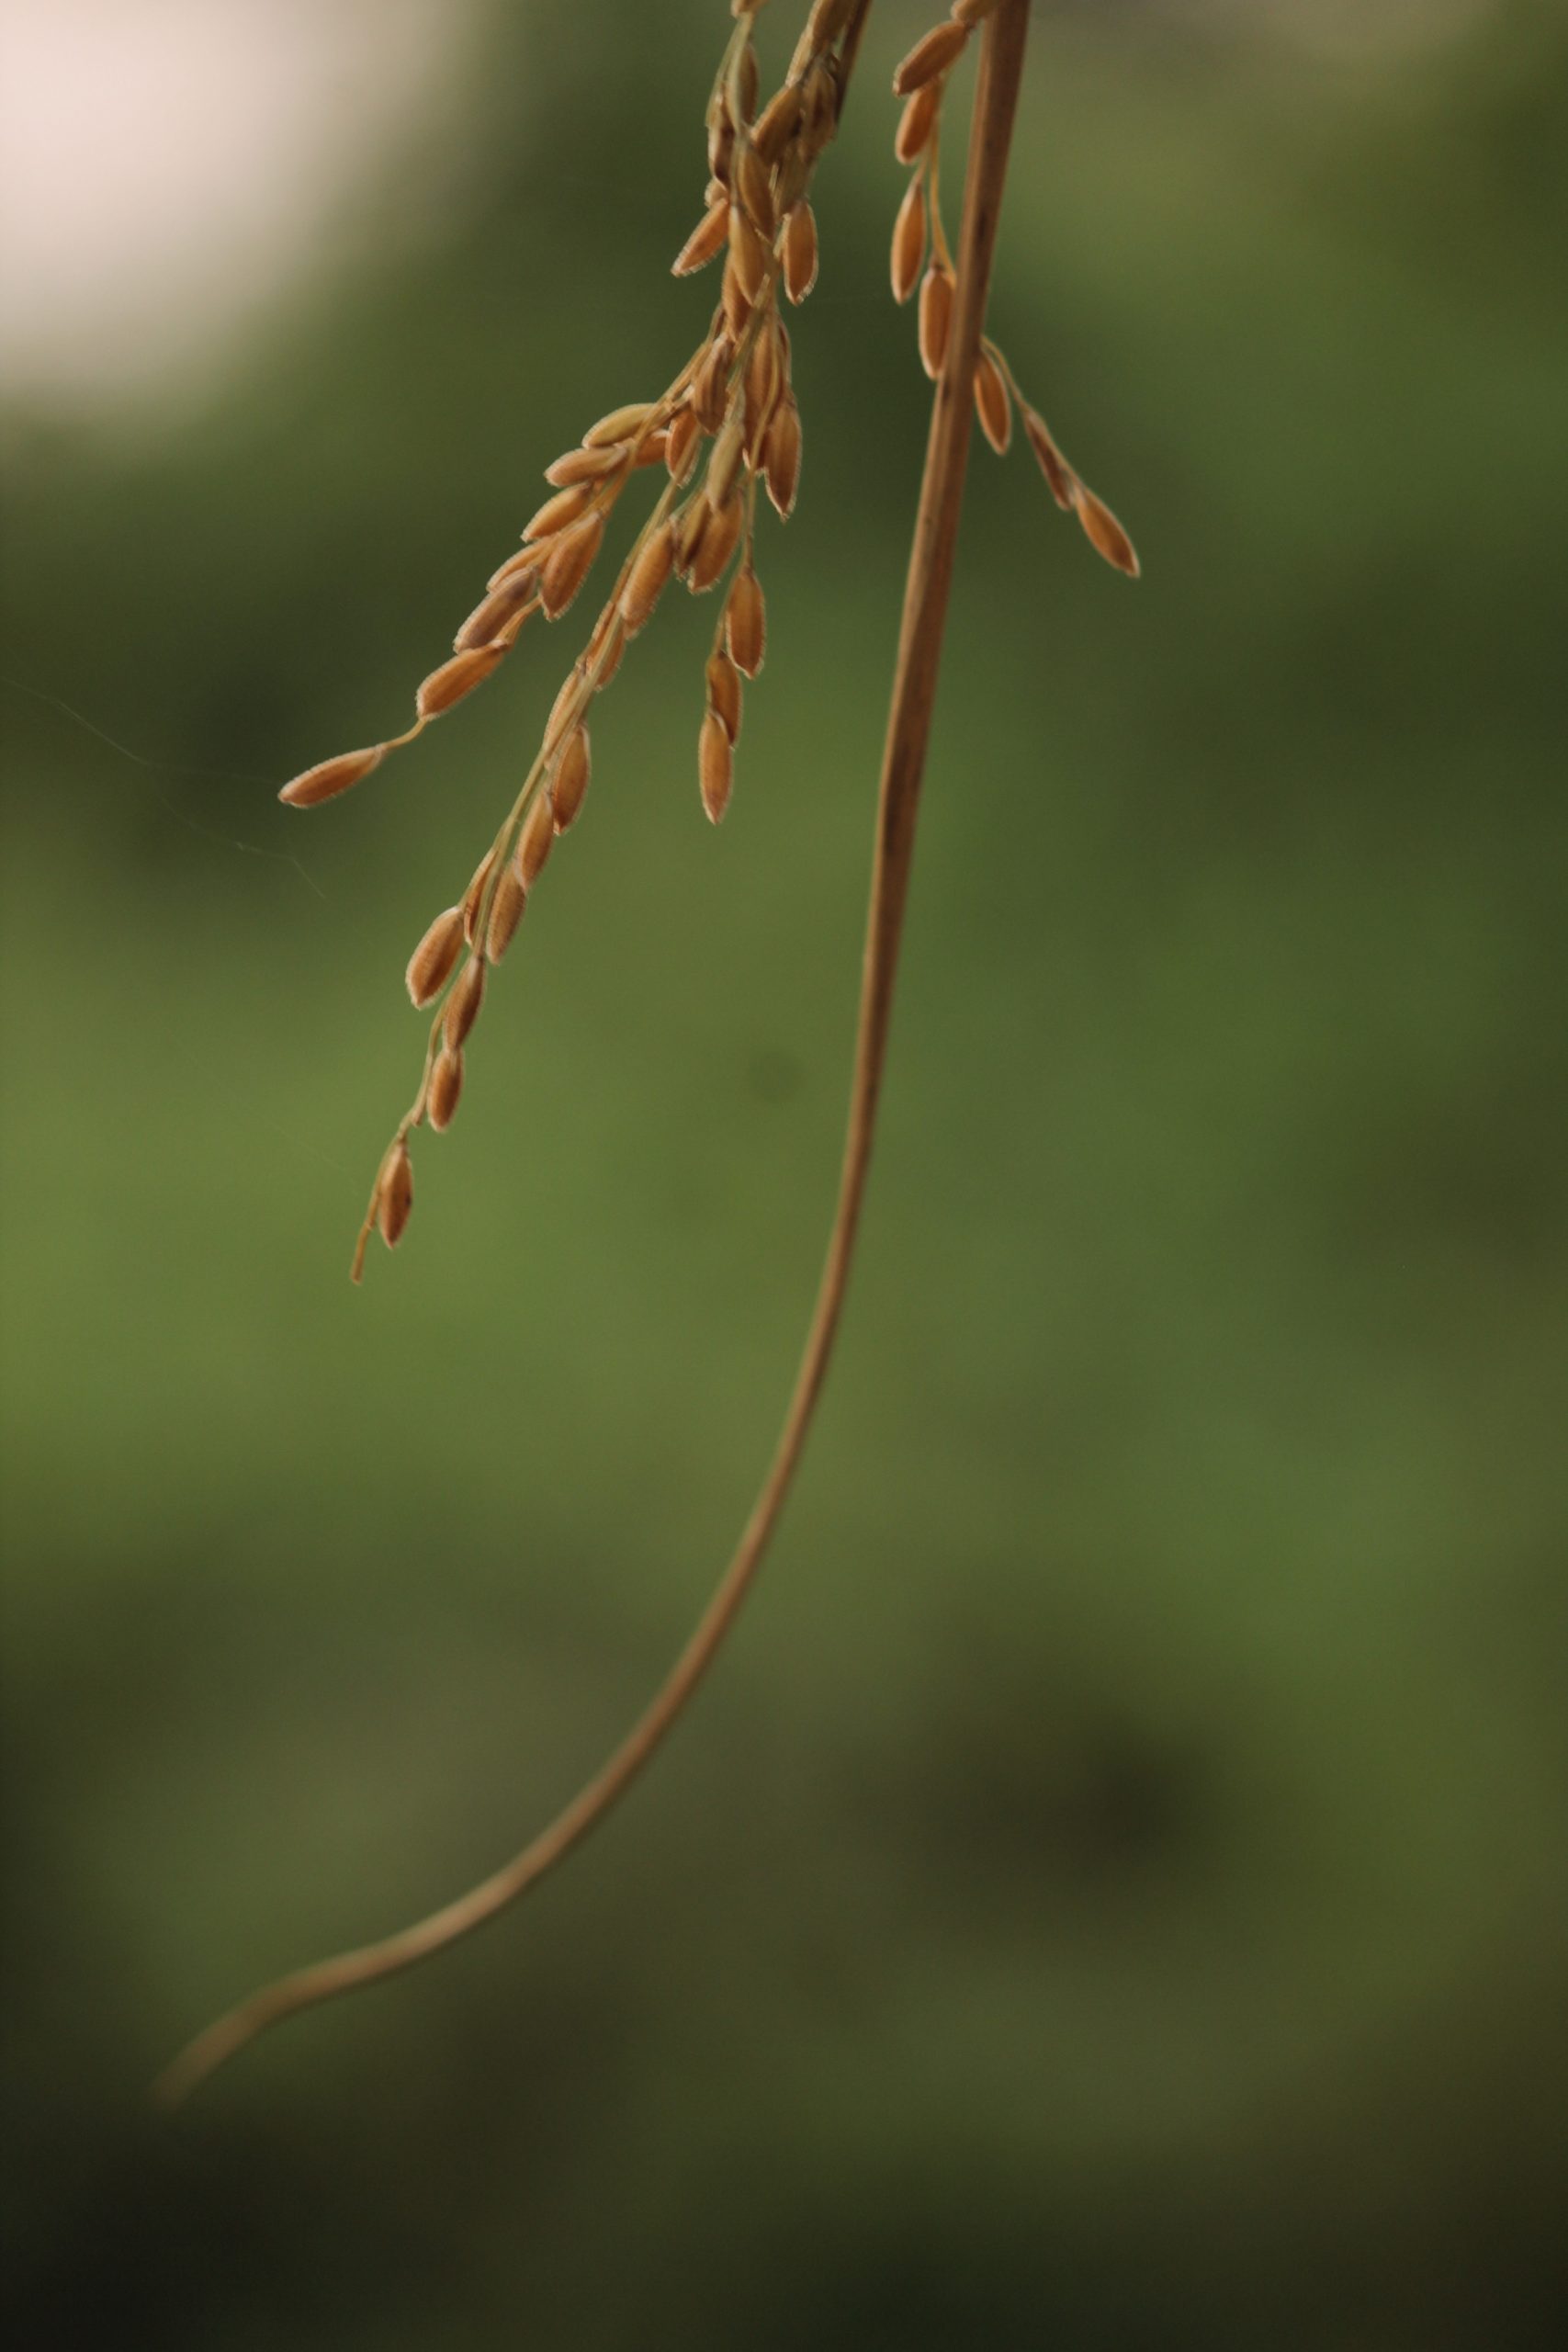 Seeds of rice plant